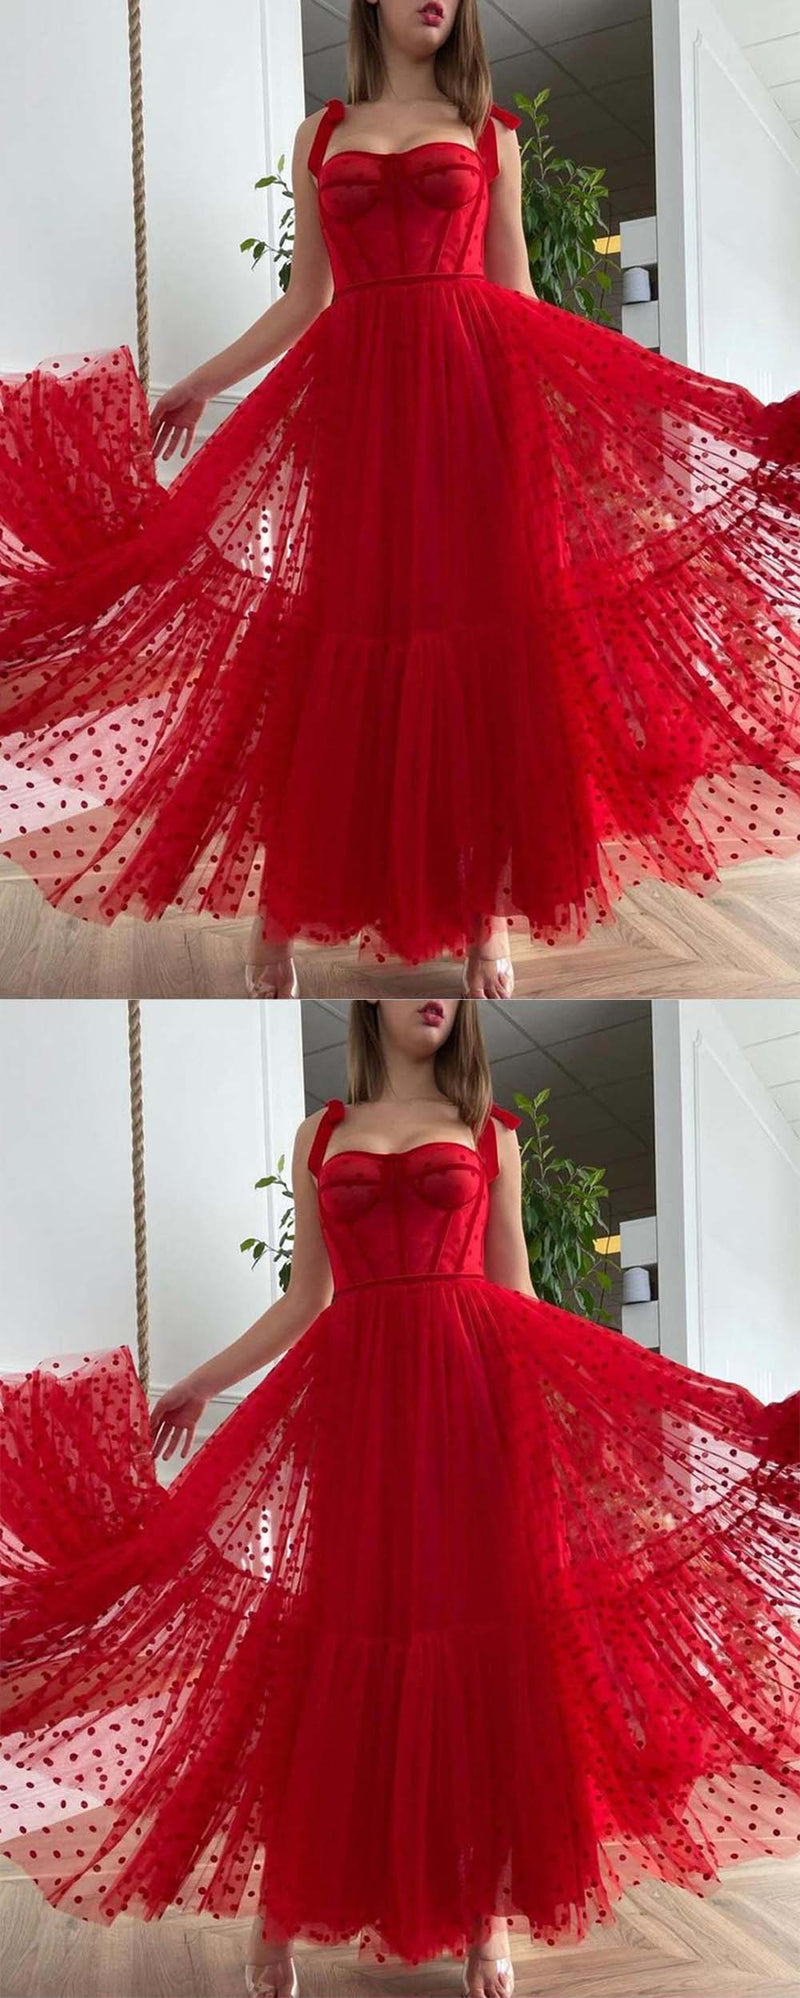 Red Polka Dots Tulle A Line Evening Dress Spaghetti Straps Tied Bow Shoulder Tea Length Party Graduation Prom Dress